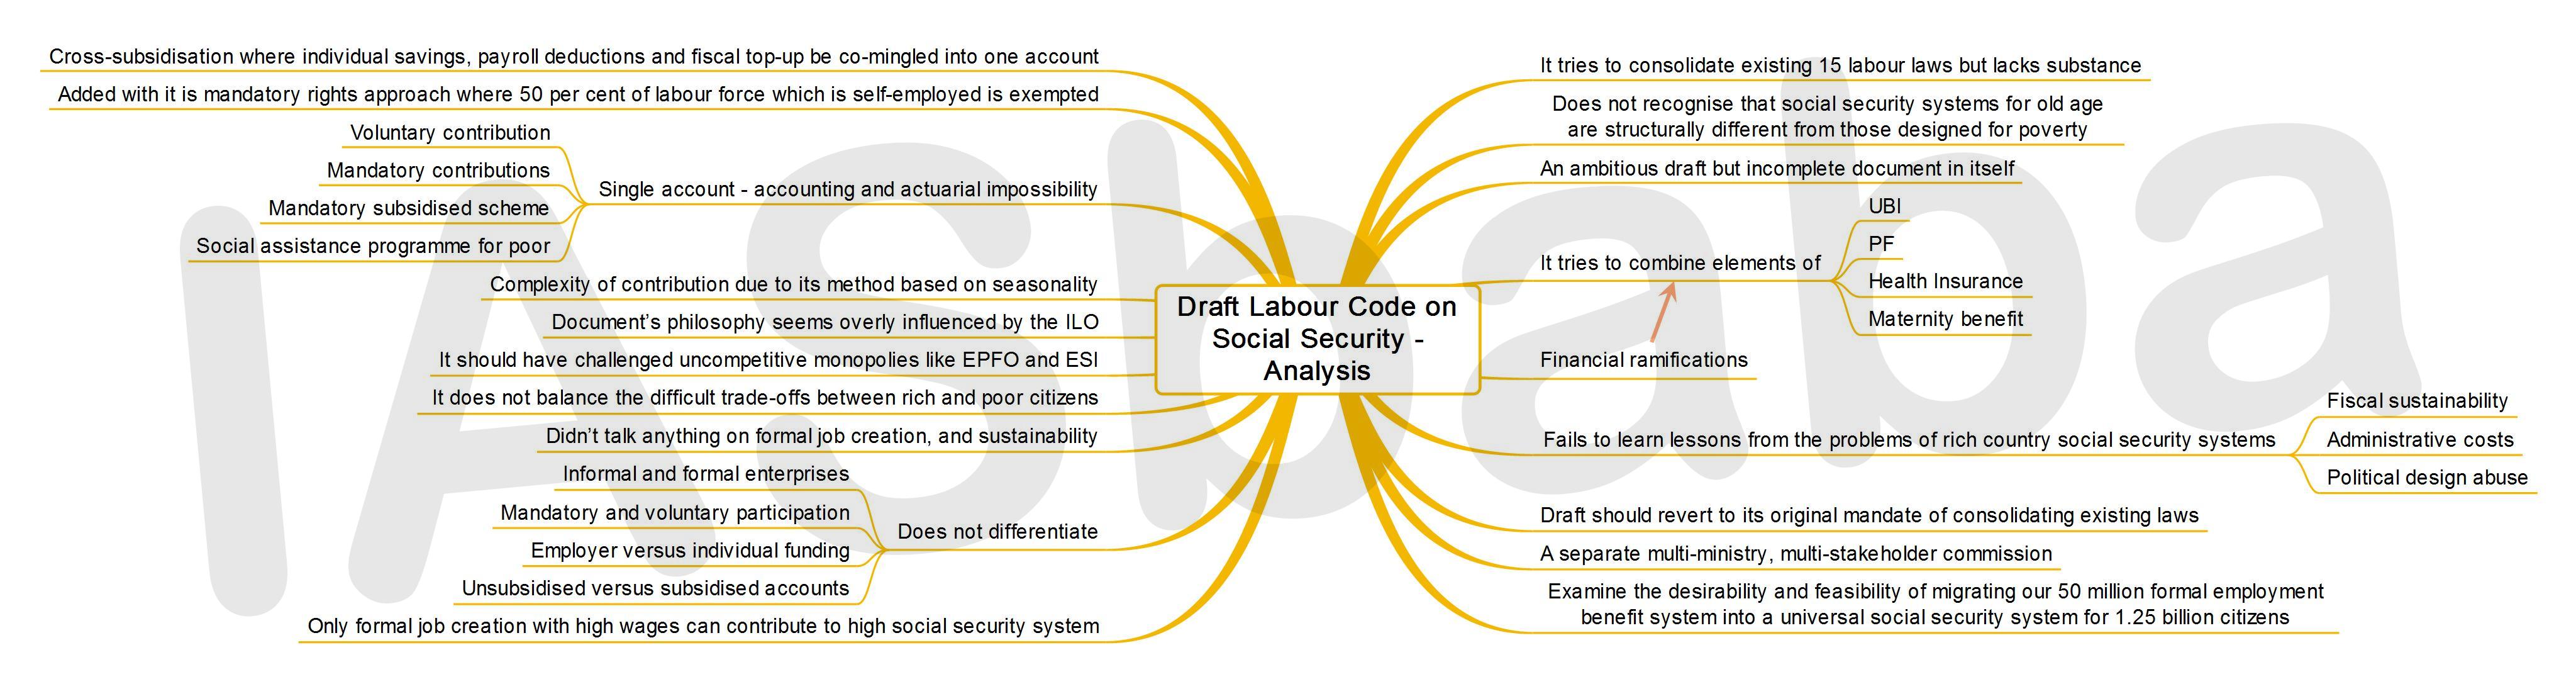 IASbaba’s MINDMAP : Issue - Draft Labour Code on Social Security - Analysis